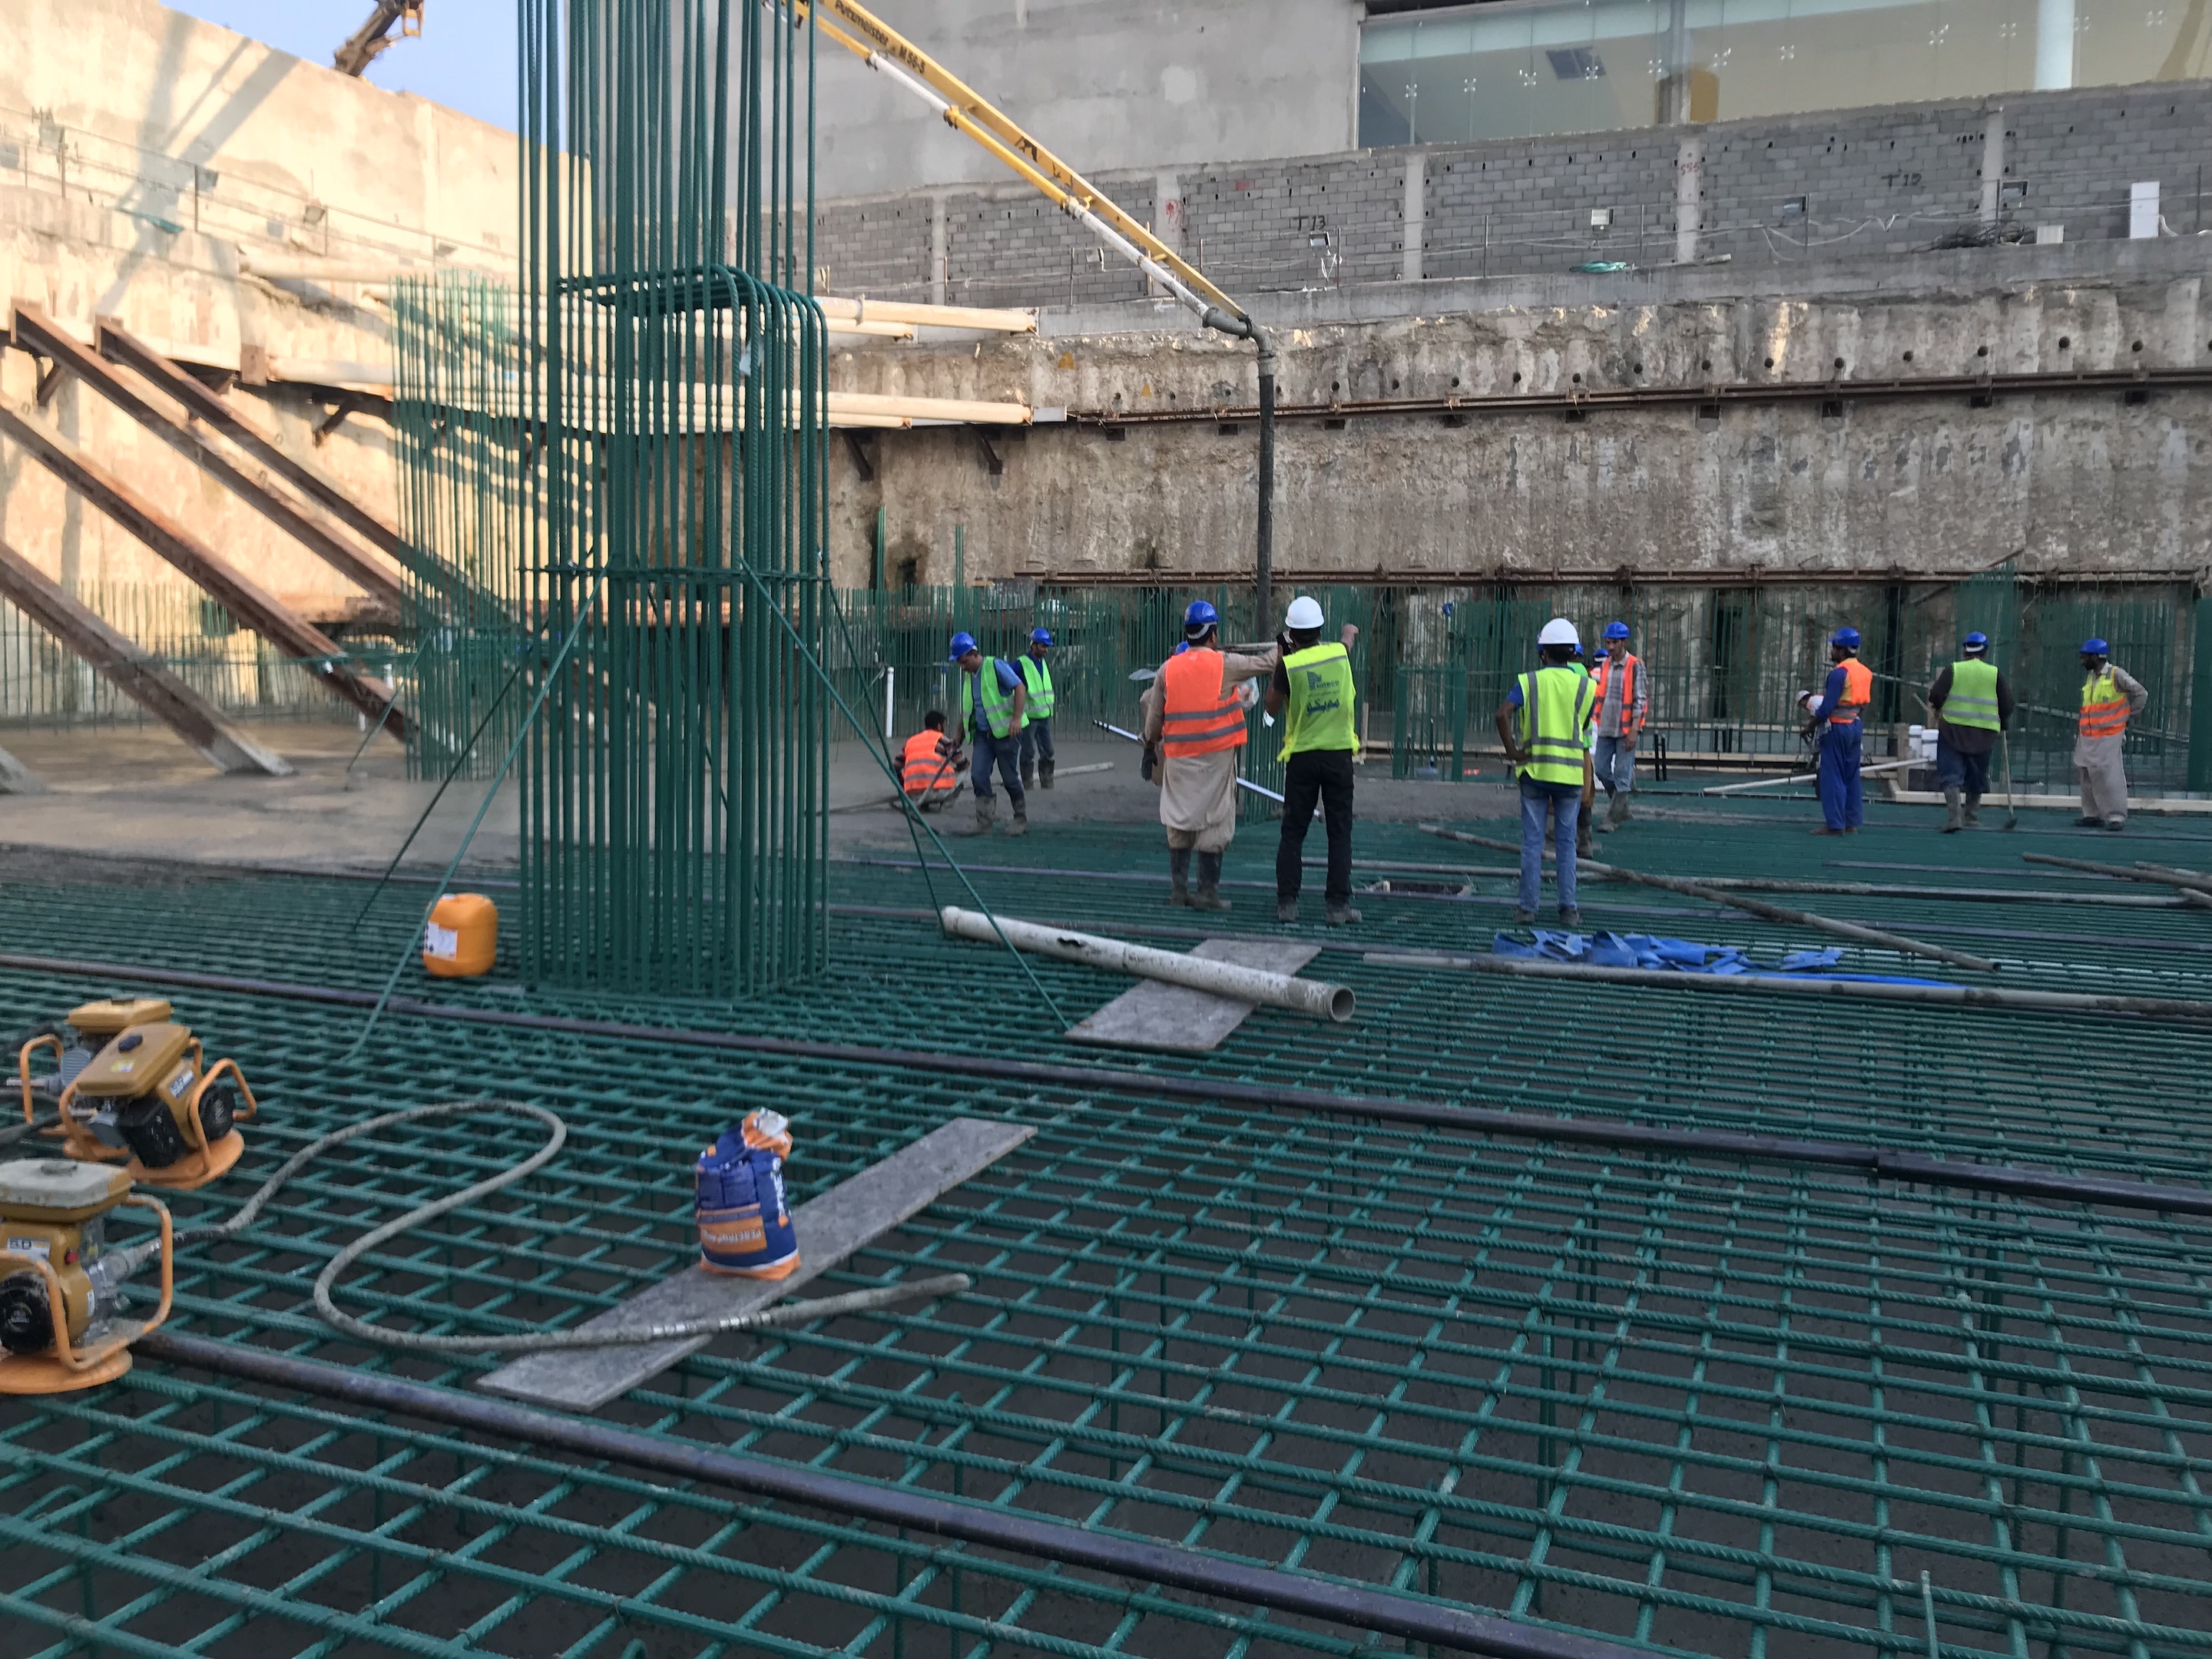 Three times the service life for concrete in Jeddah: PENETRON ADMIX was used to treat about 7,850 cubic yards of concrete for the foundation slabs, and about 1,570 cubic yards for the retaining walls.